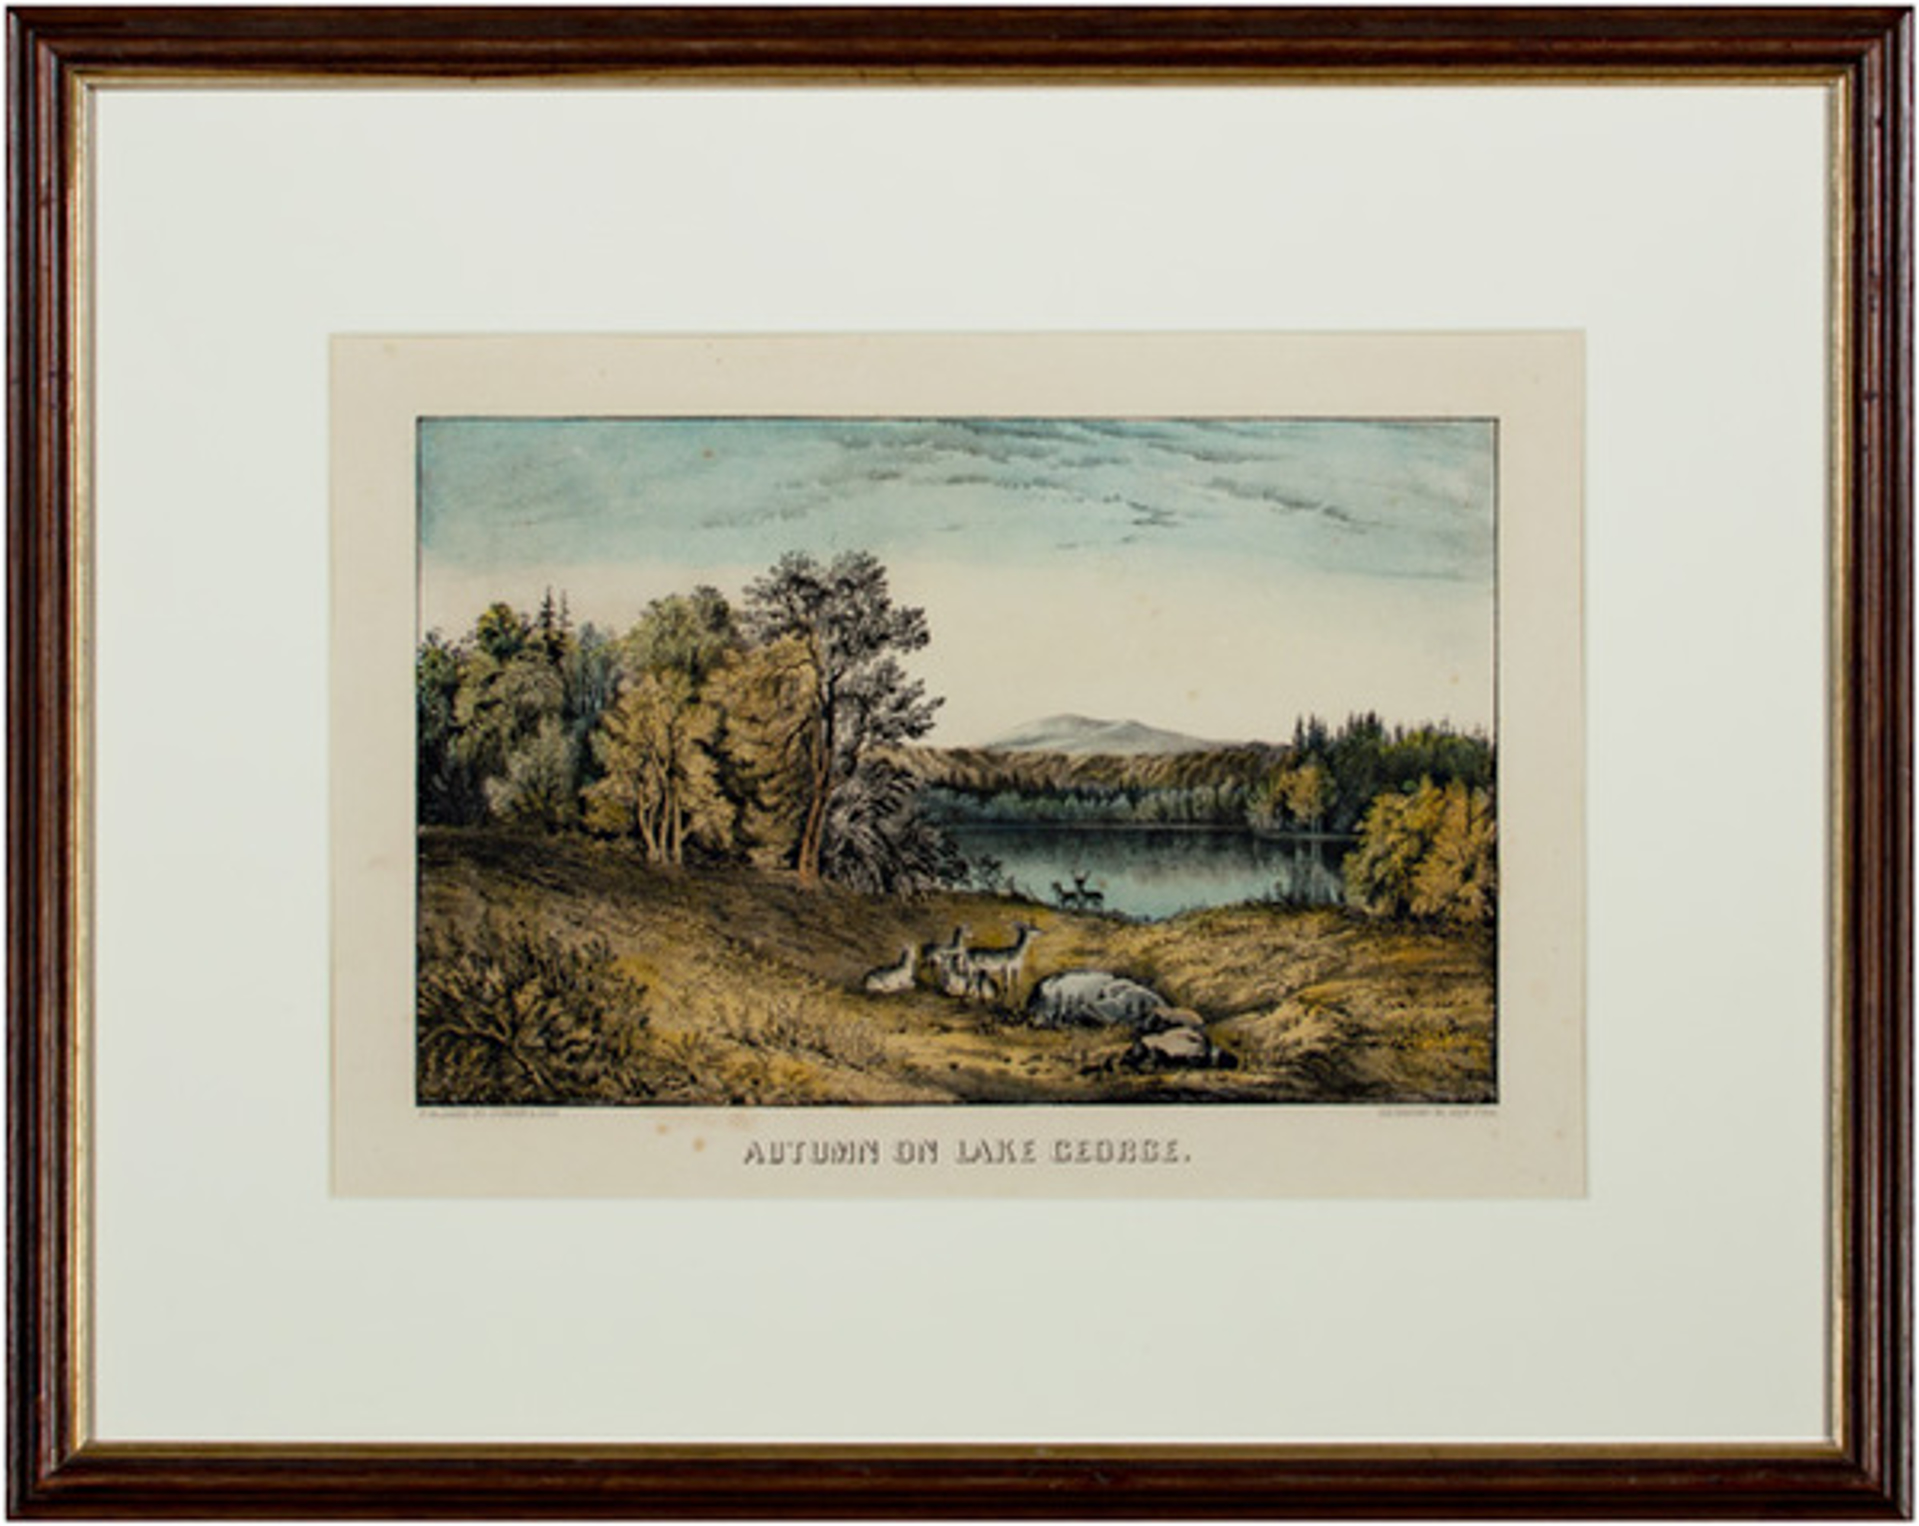 Autumn on Lake George (Deer) by Currier & Ives